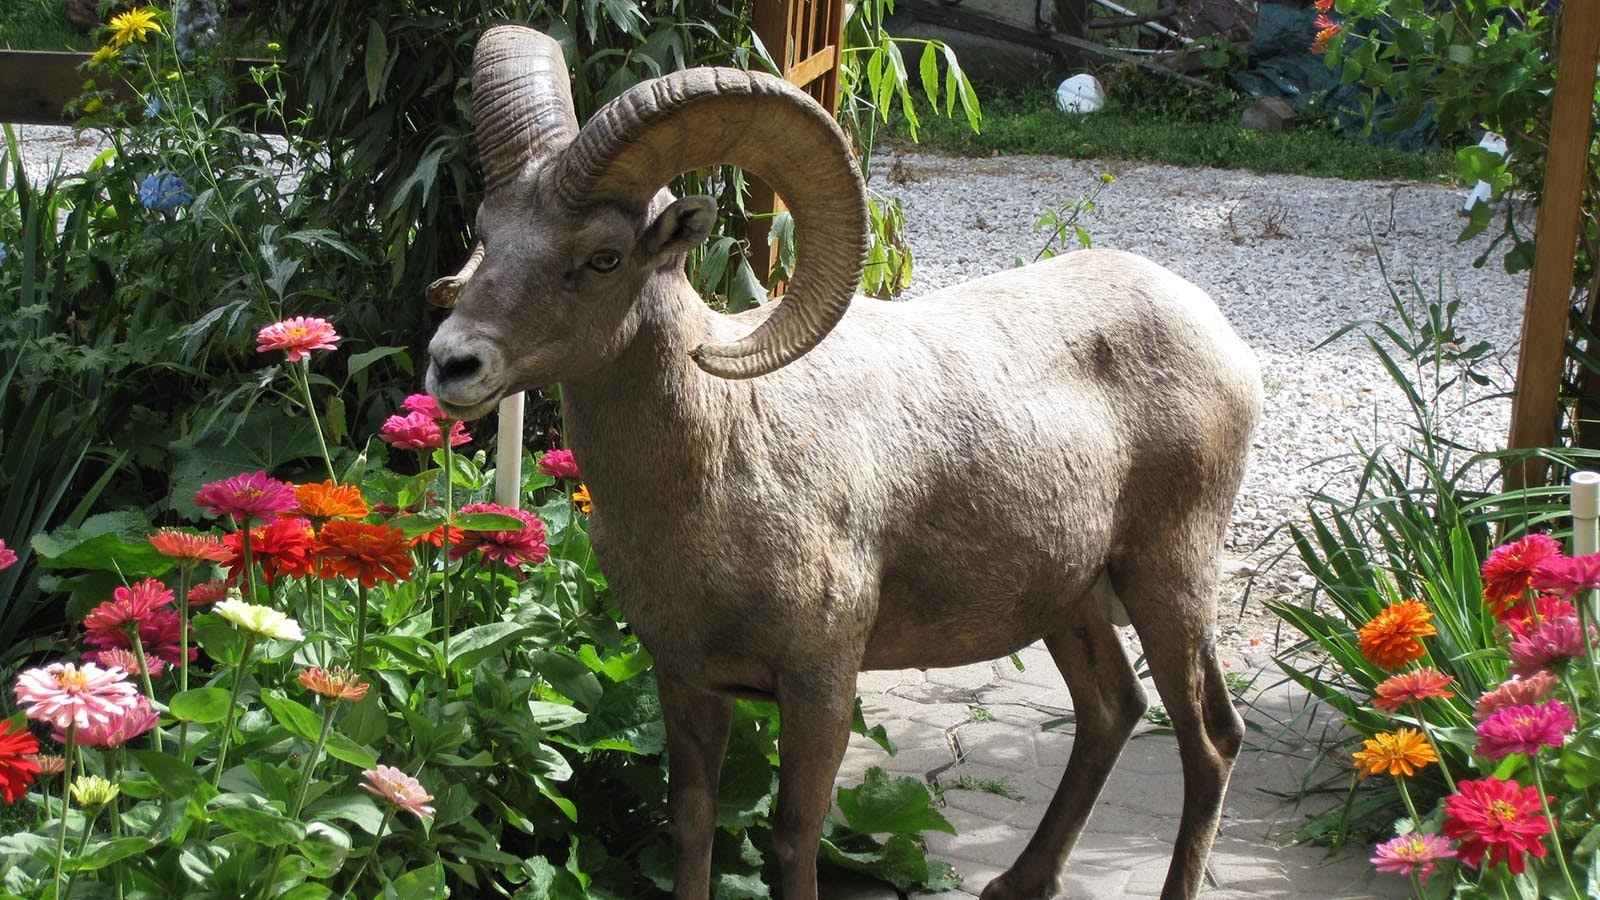 Bam-Bam, a bighorn sheep ram that lived in Sinks Canyon State Park near Lander, liked to visit the home of Jack and Diantha States and eat their flowers.